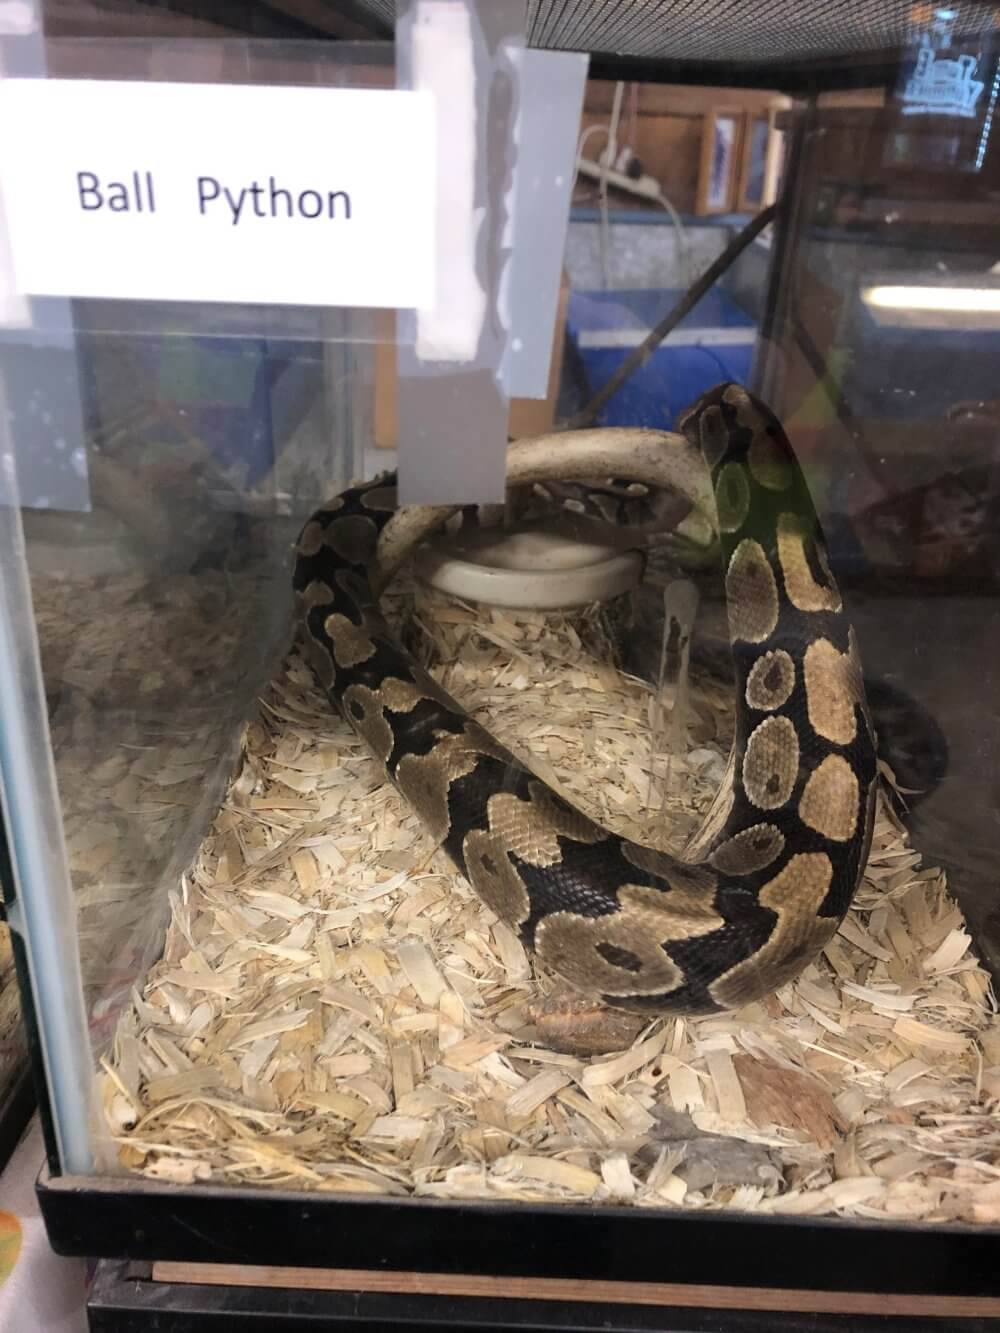 Is it cruel to keep a ball python as a pet?